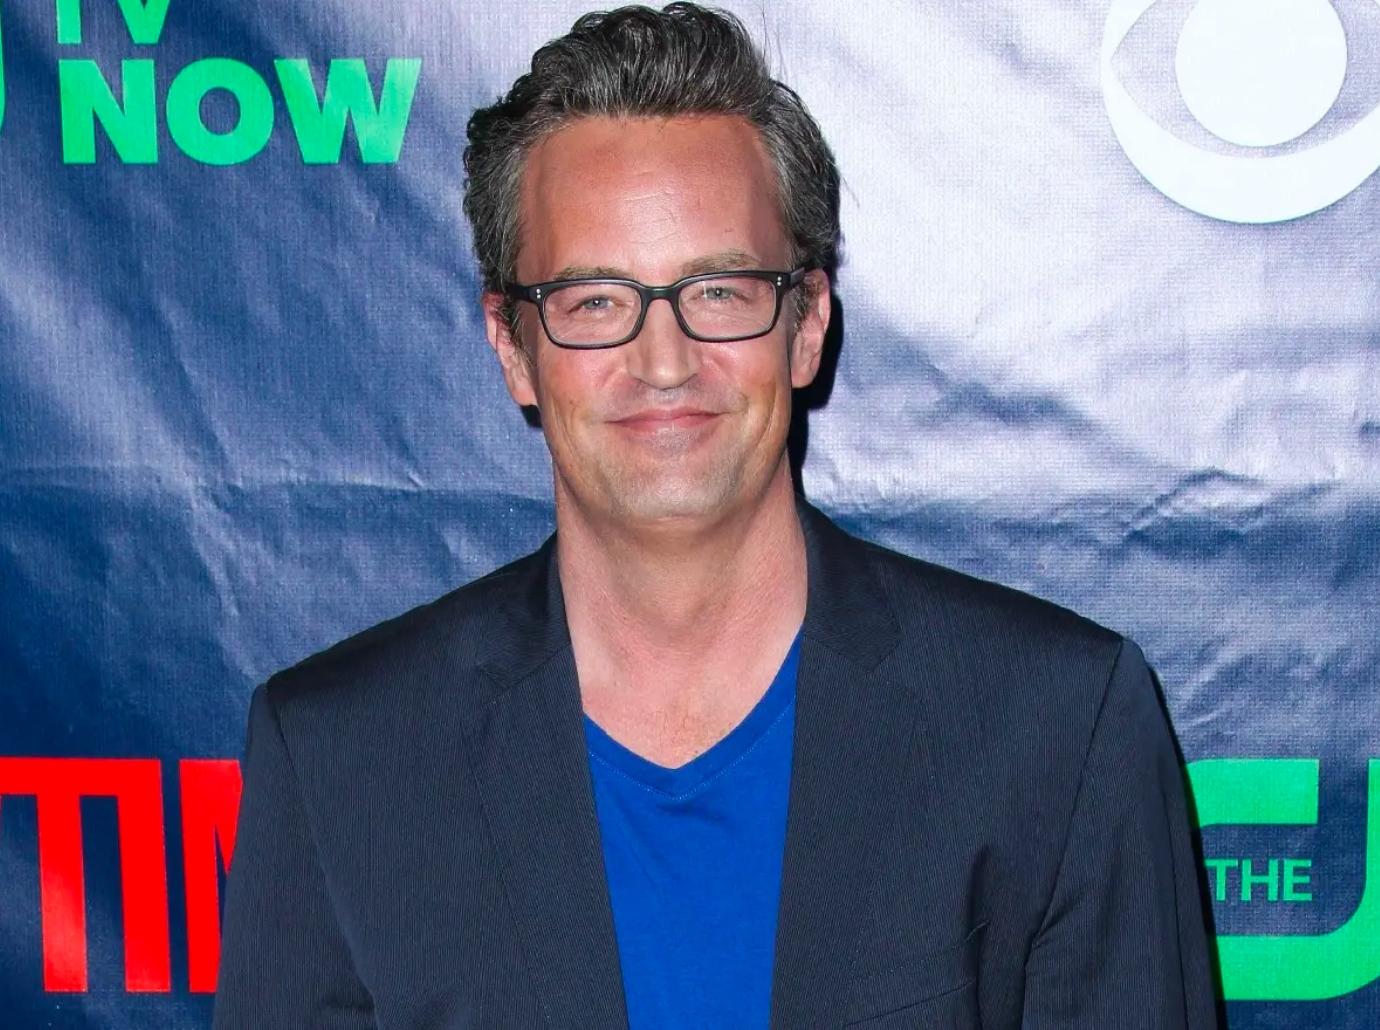 Matthew Perry Wasn't In Water Long Before Apparent Drowning